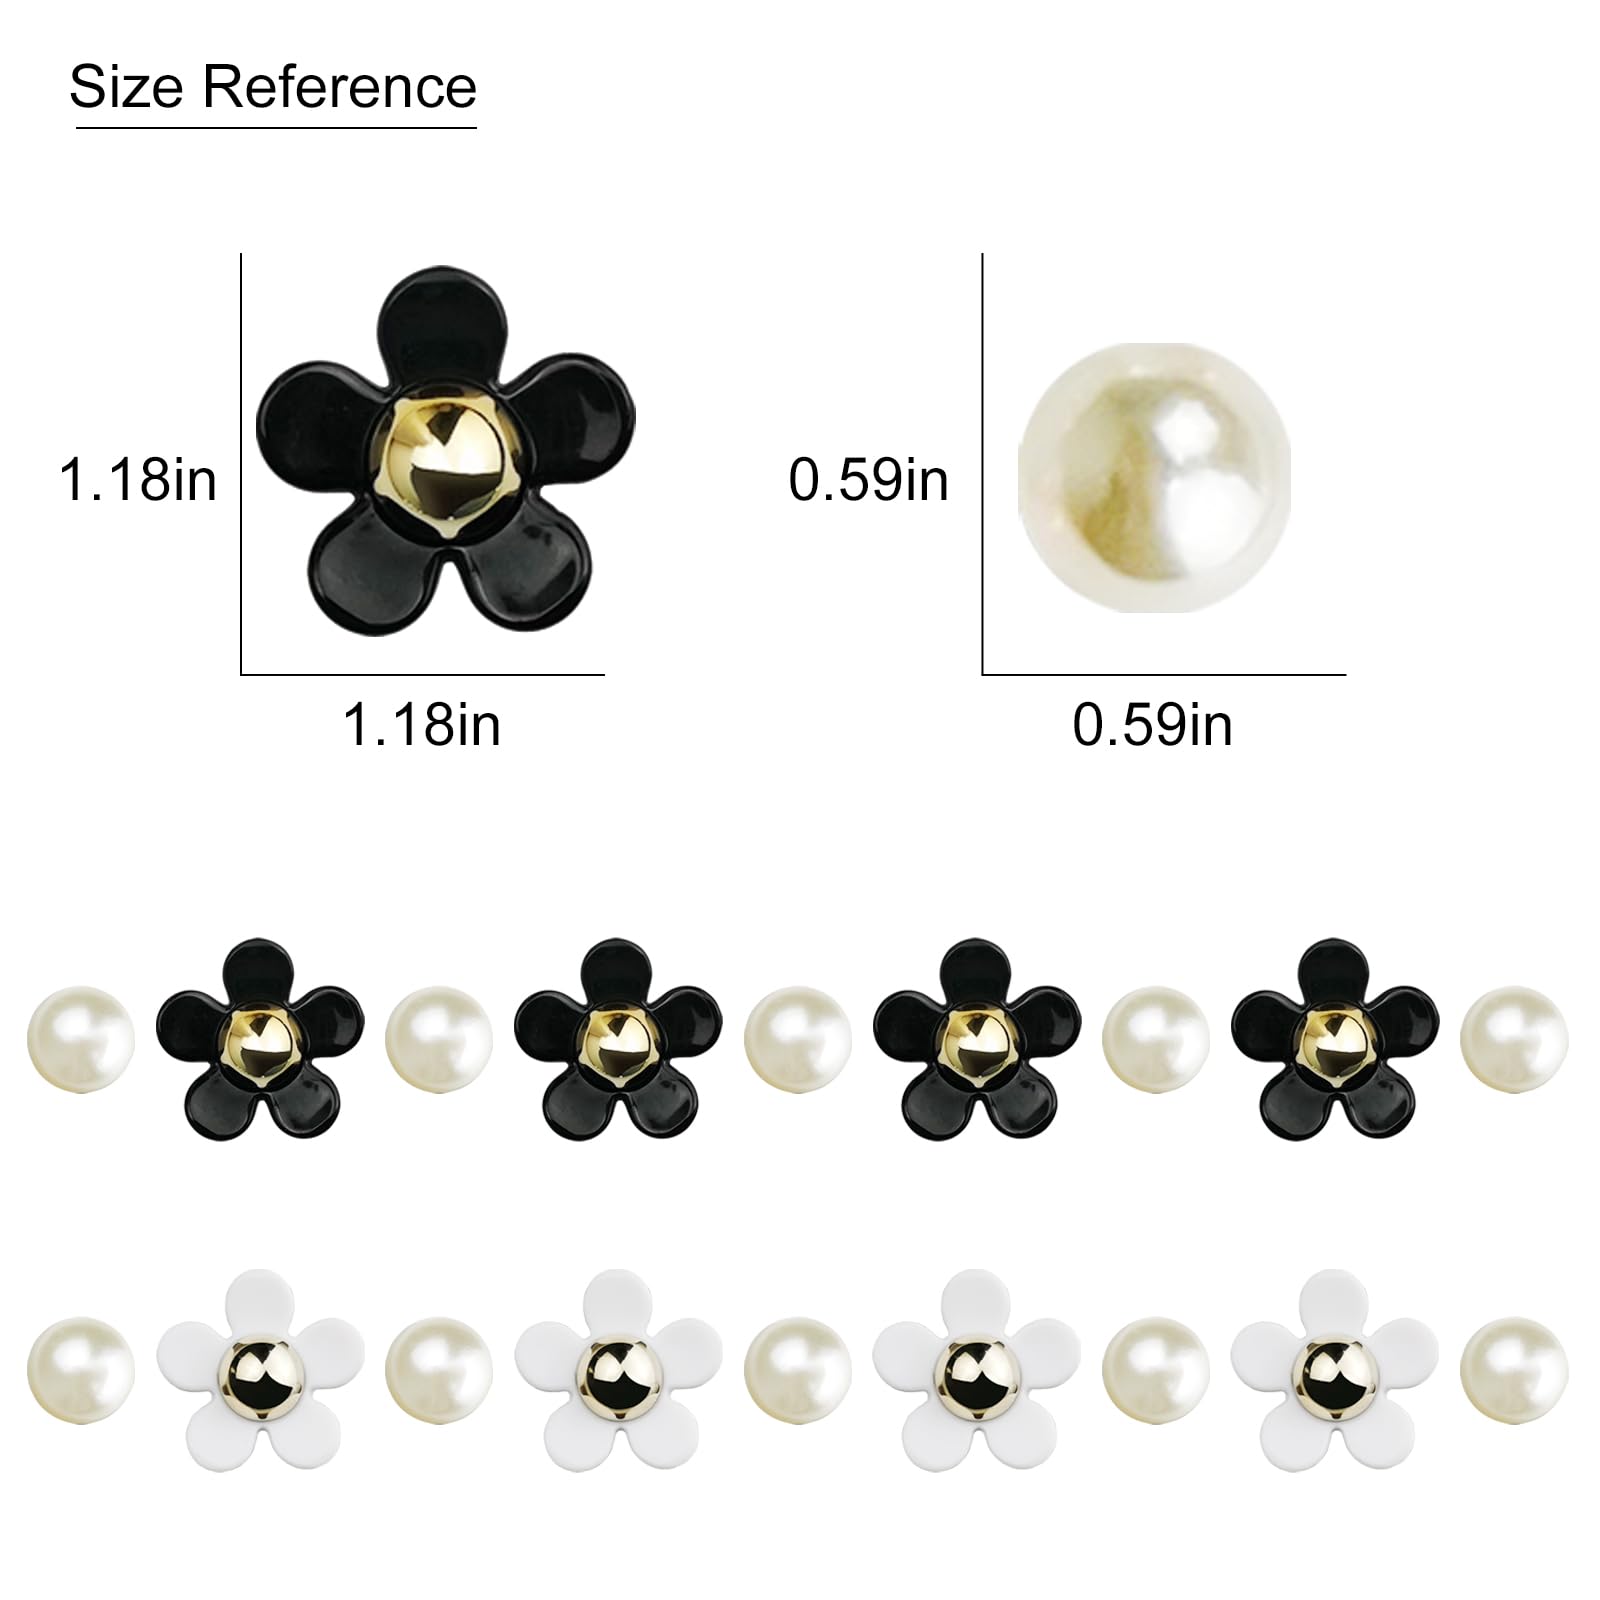 IOKUKI 18 PCS Flower Shoe Charms for Women Girls, Cute Flower Charms for Girls with Daisy Flower Charms and Pearl Shoe Decoration Accessories